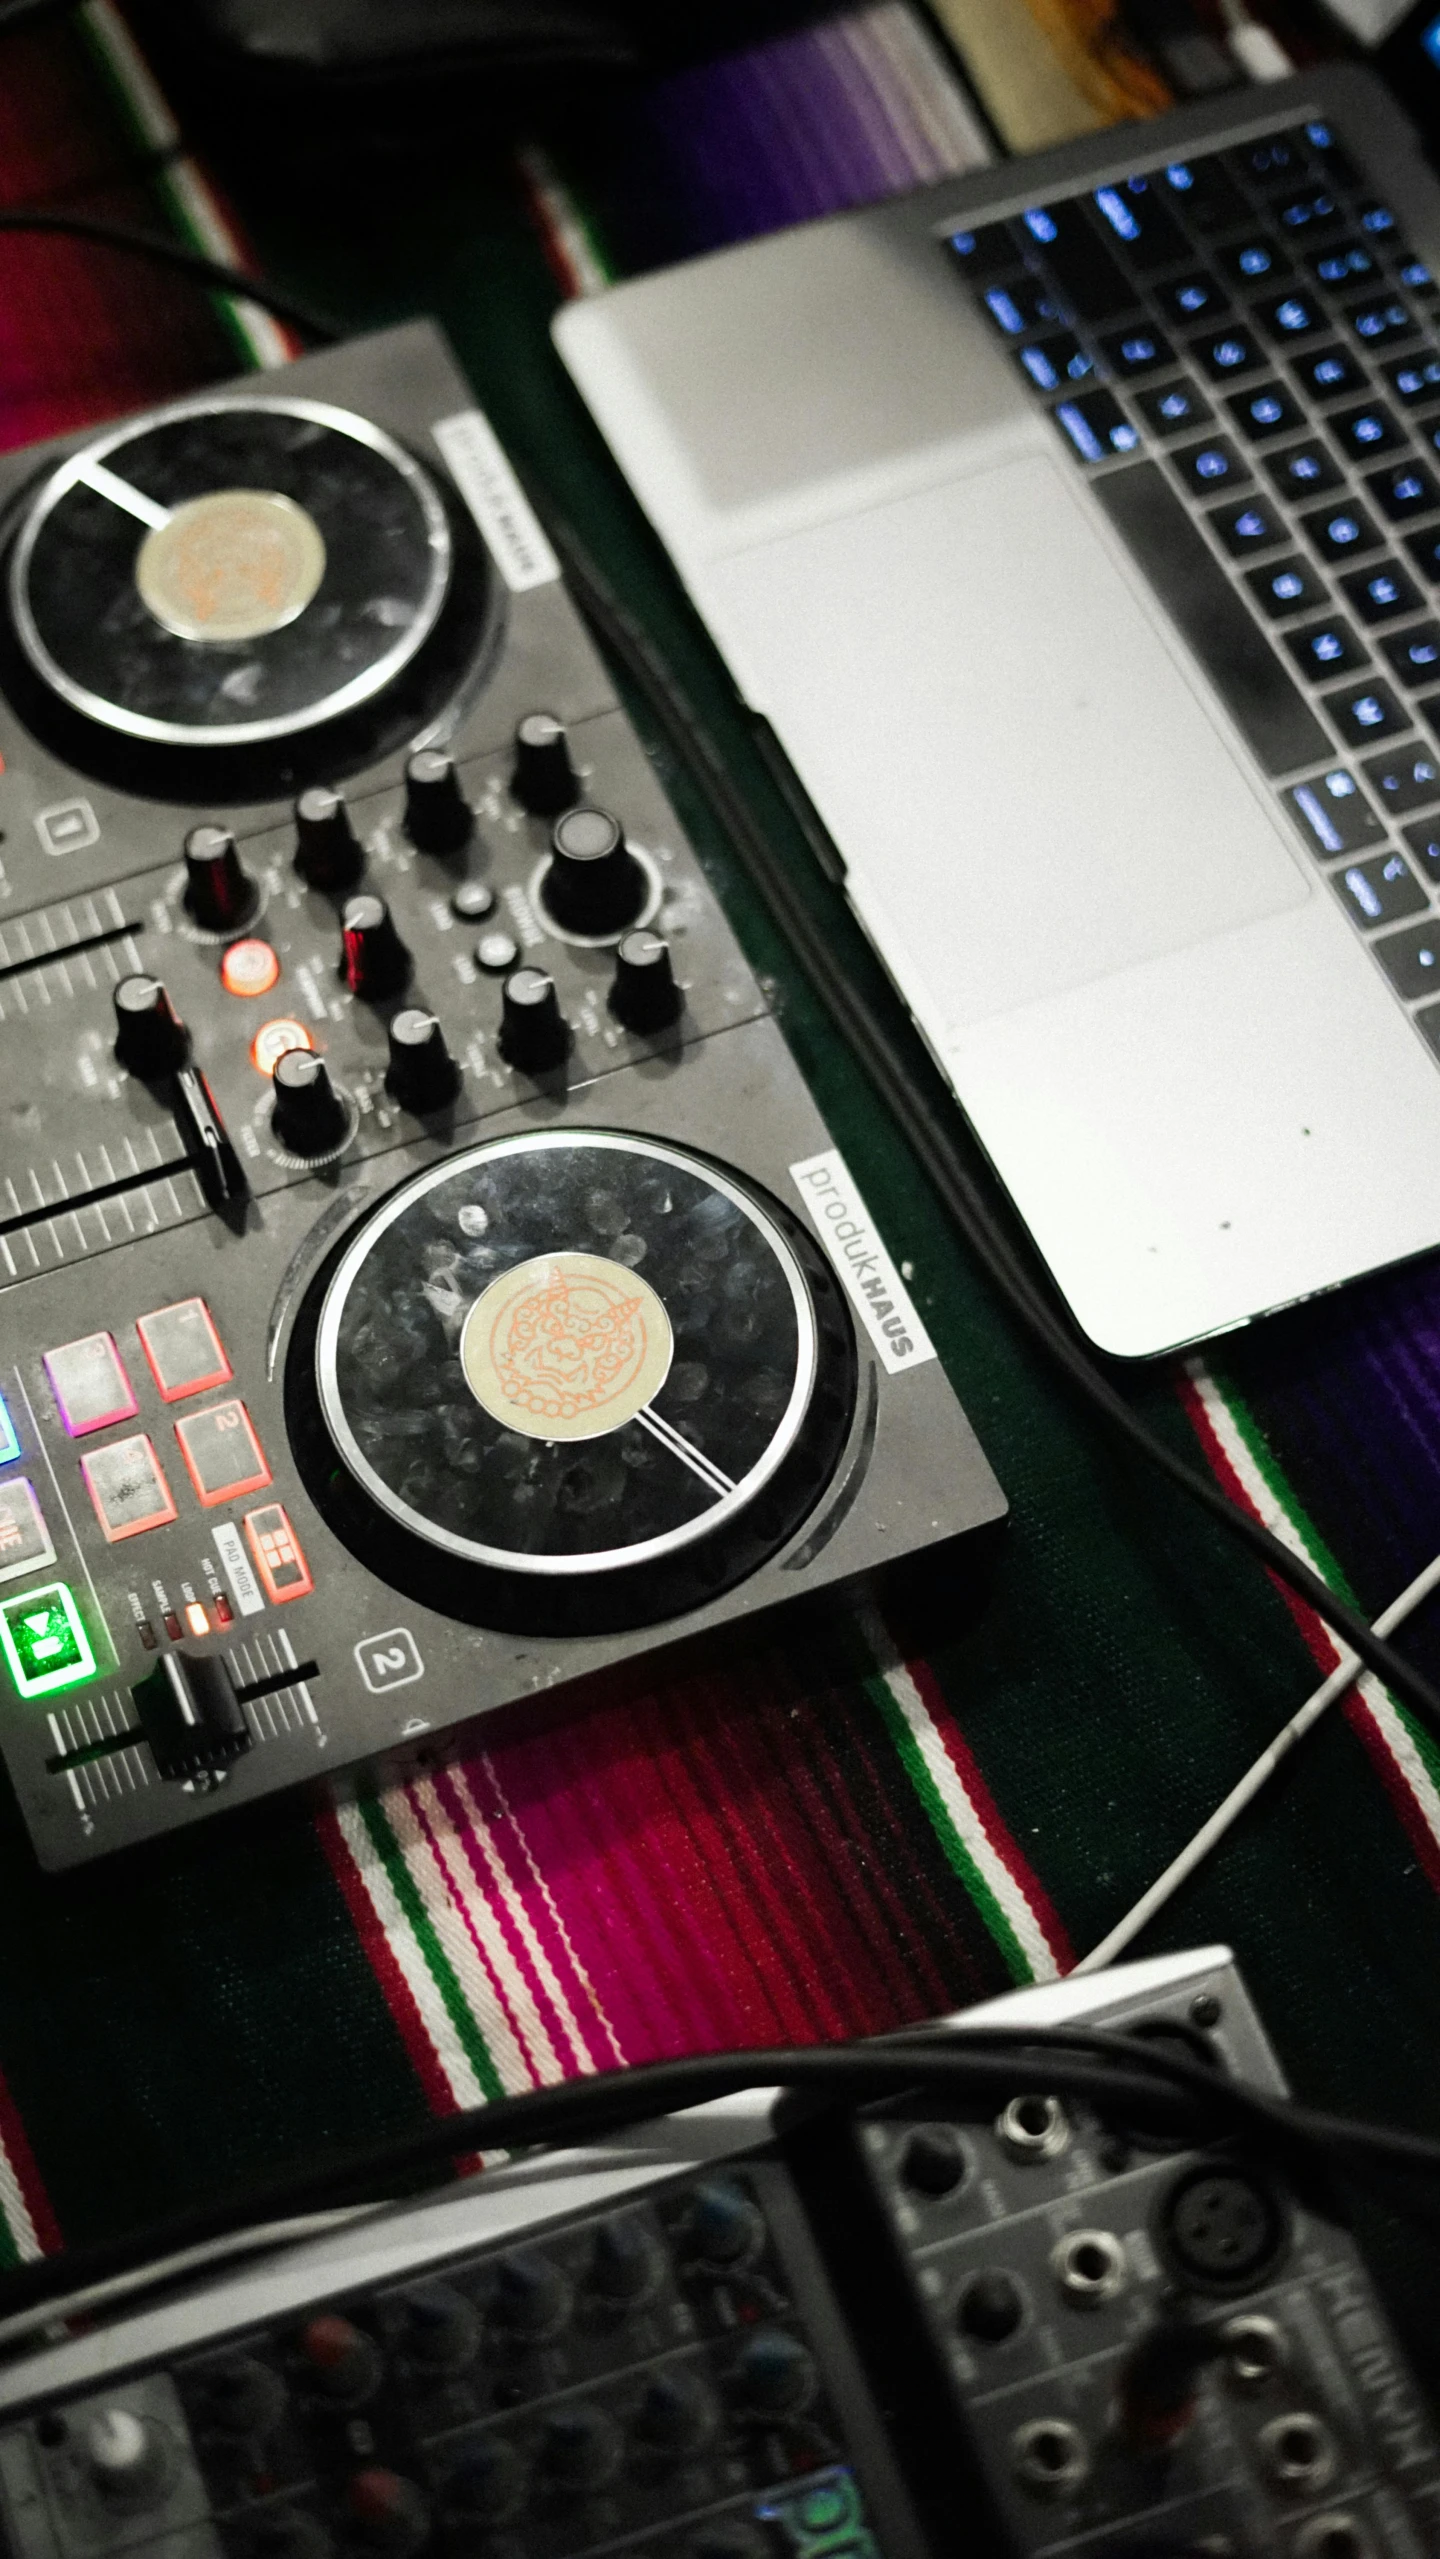 dj equipment on a colorful cloth with a laptop